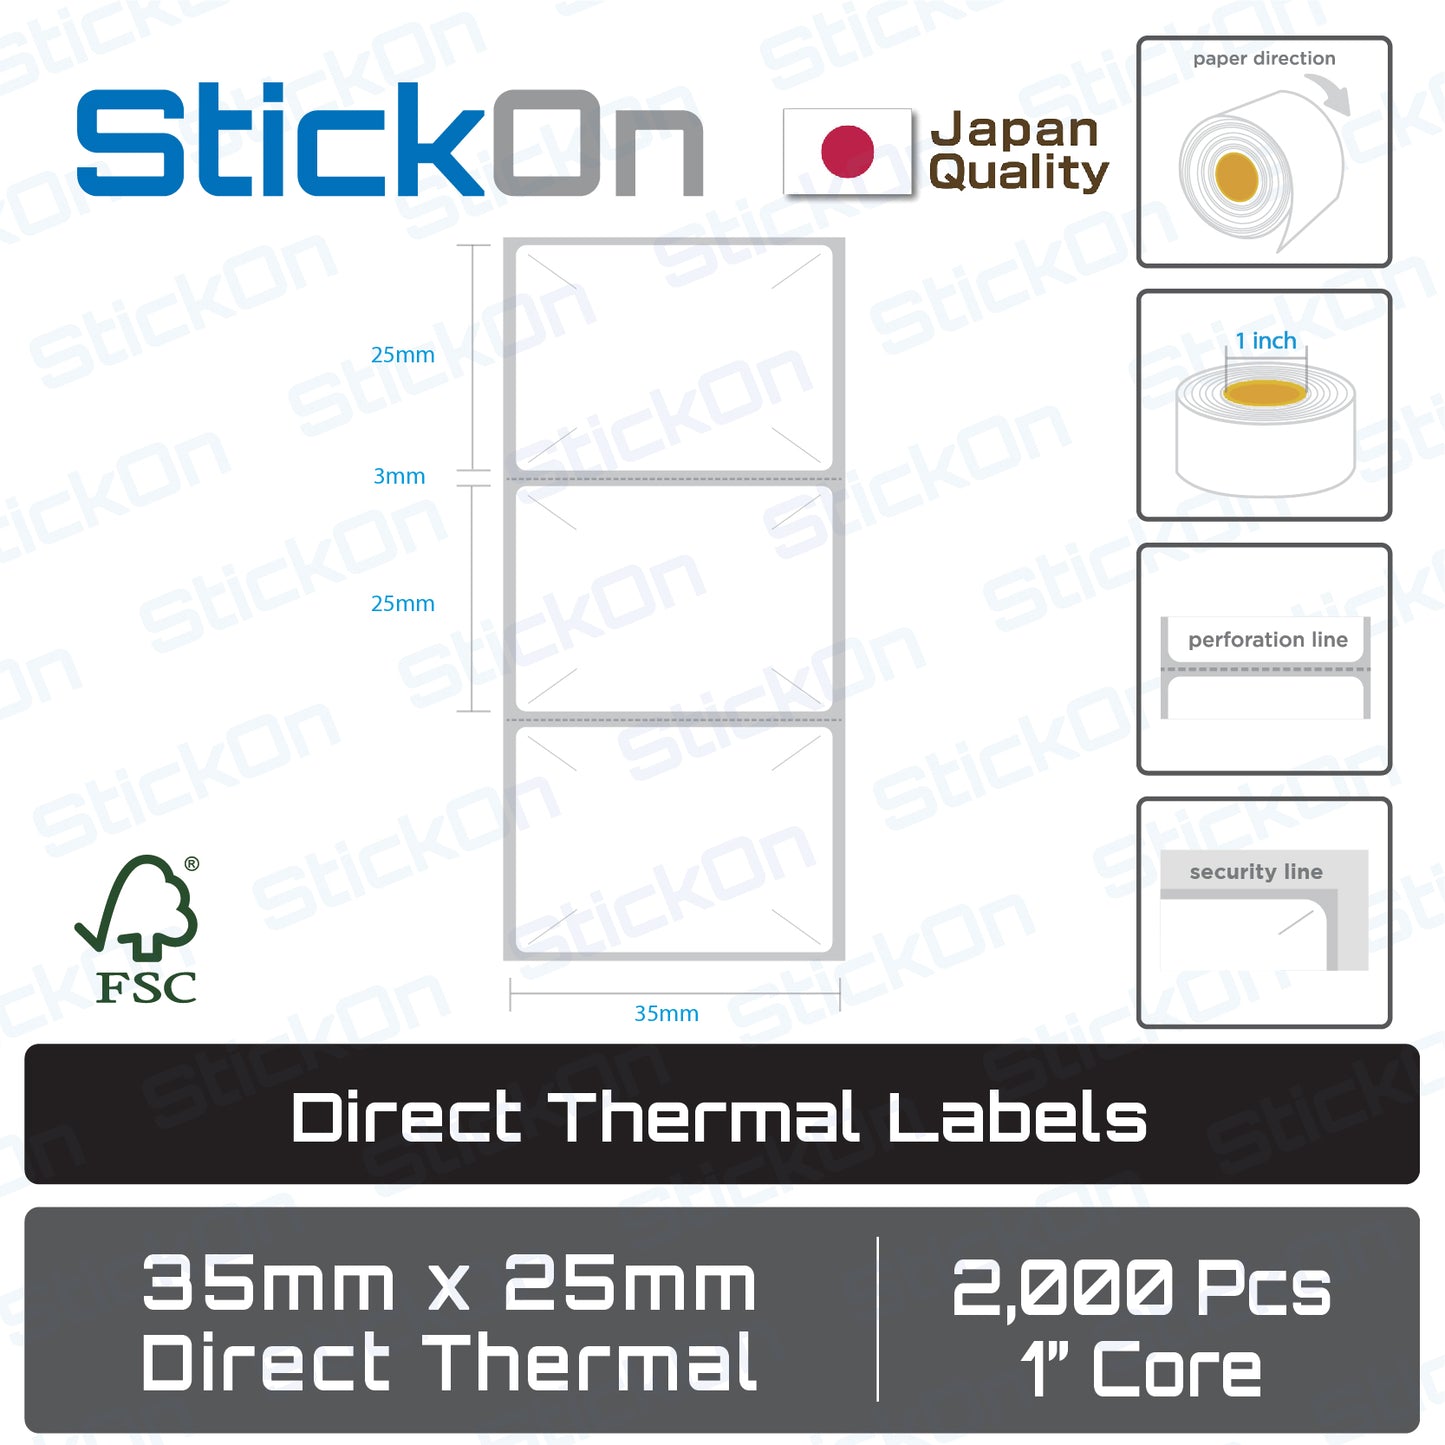 Barcode Label Direct Thermal FSC Sticker [Various Size] 1" Core